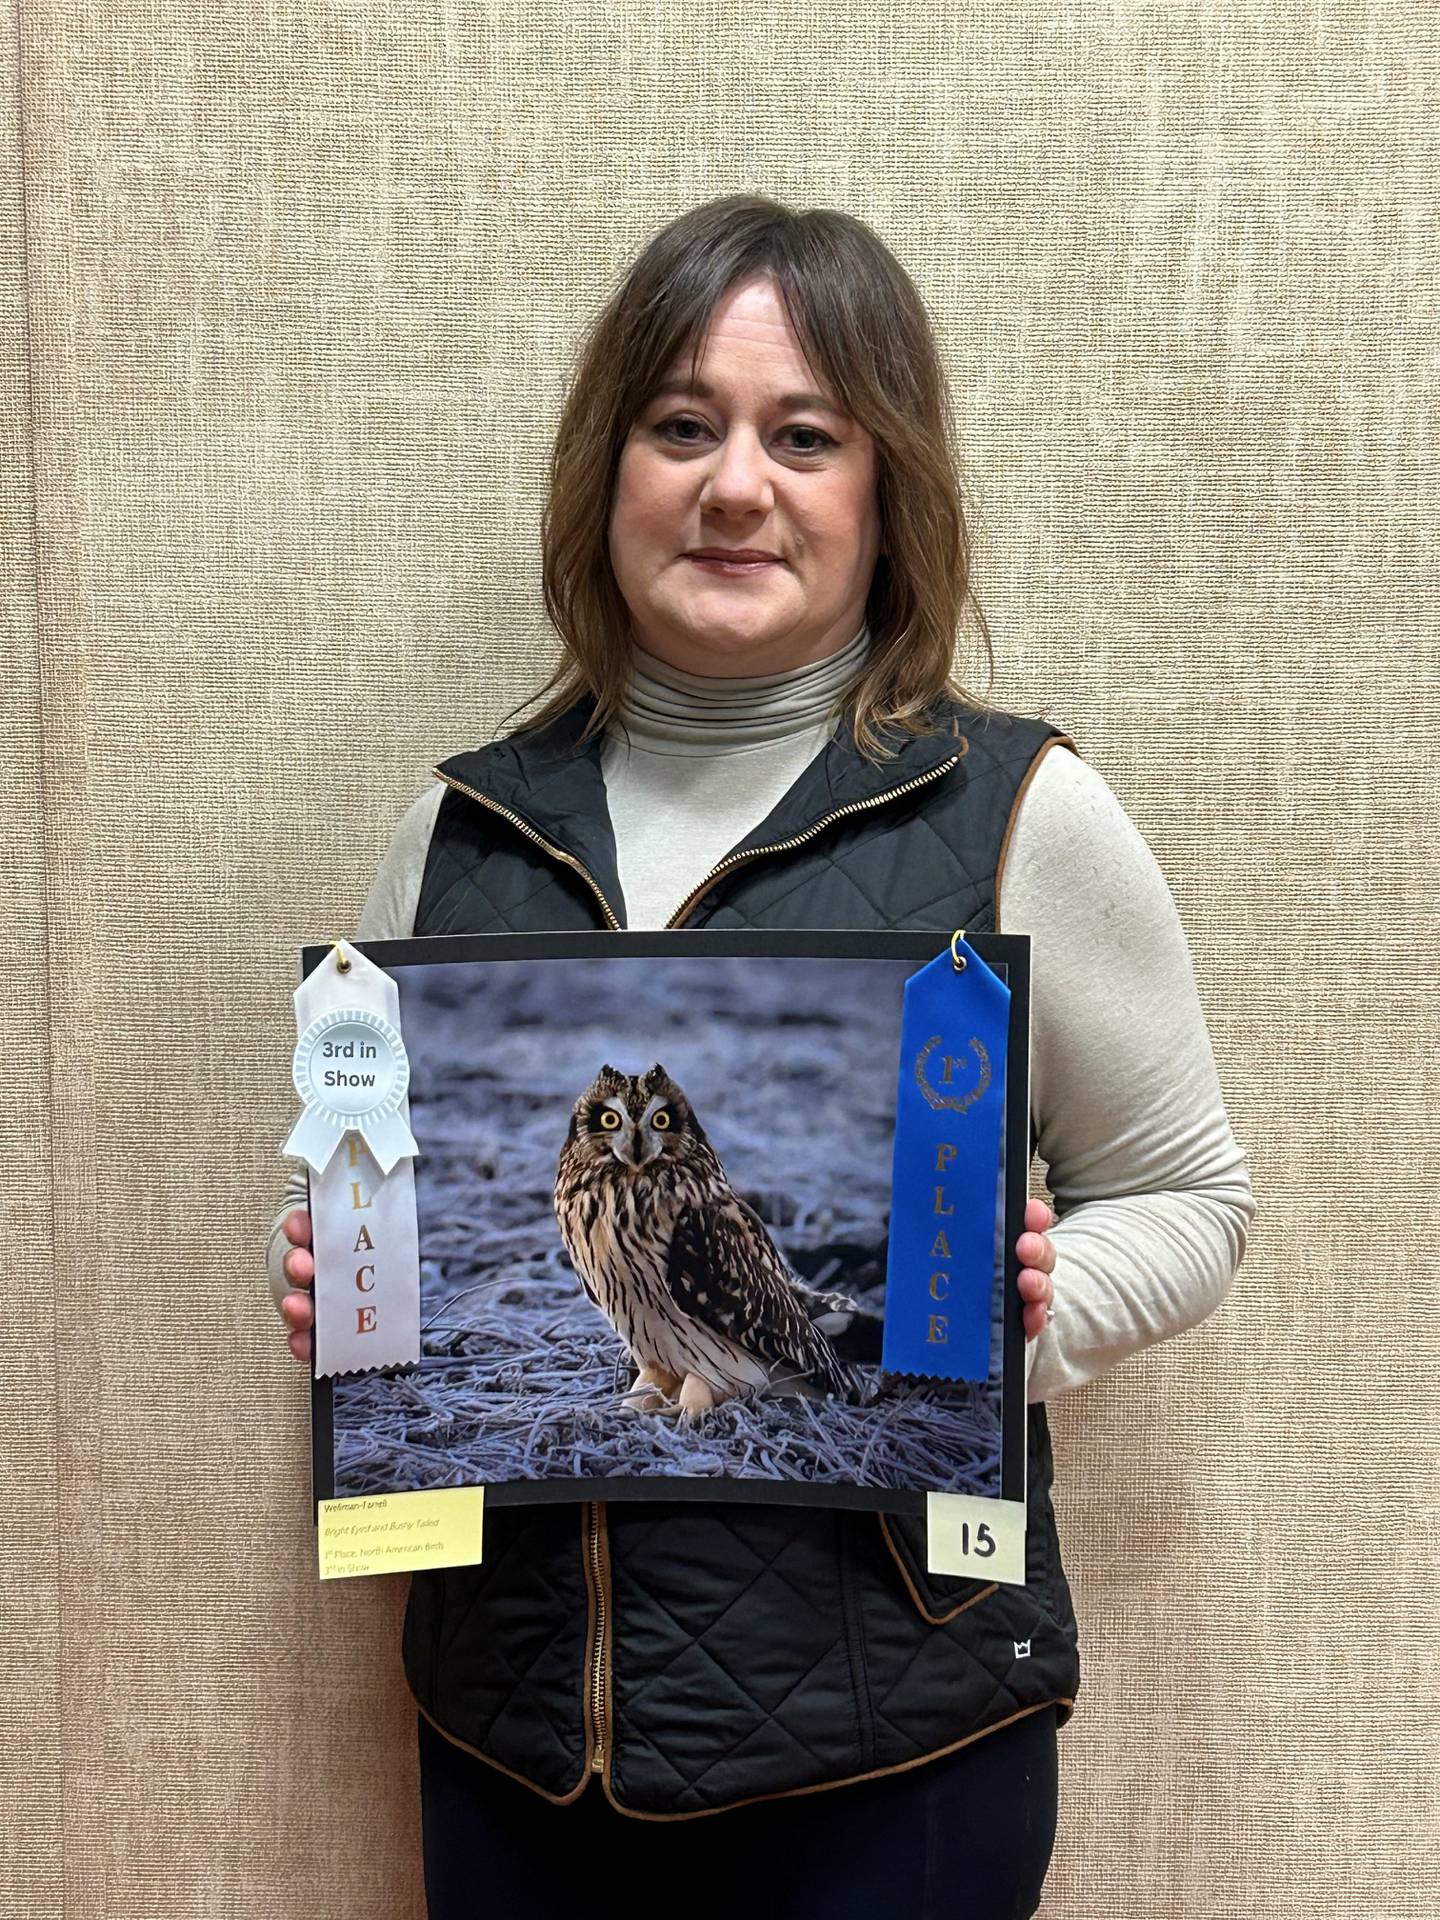 Heather Wellman Farrell, of Streator, finished third place best of show at the Starved Rock Photography Show, demonstrating her “Bright-eyed and bushy-tailed” photo of a short-eared owl.